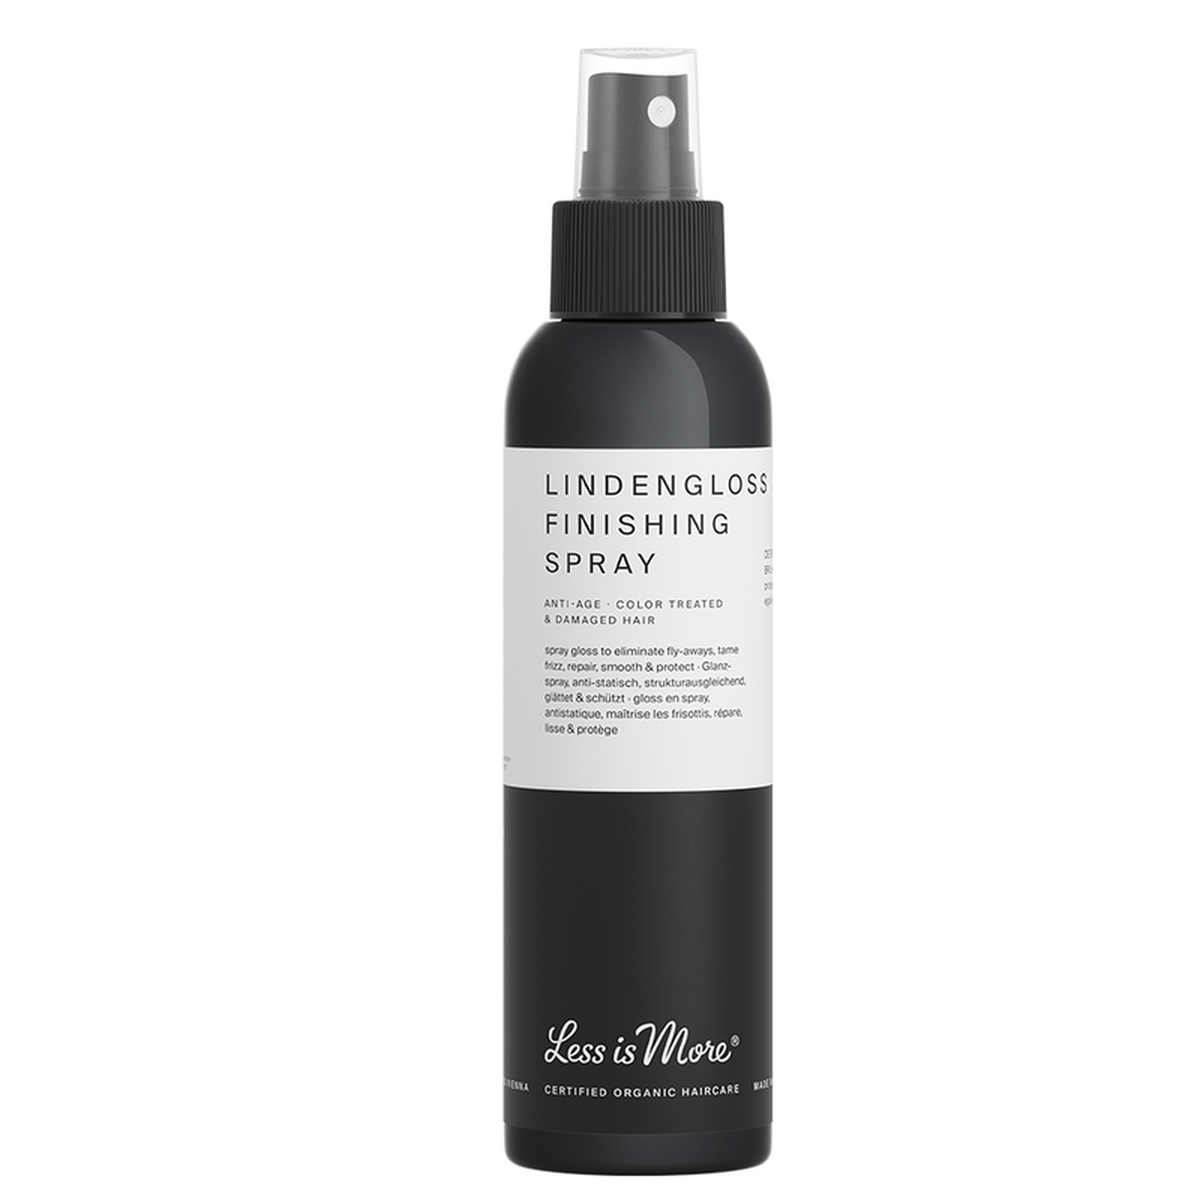 Less is more Lindengloss Finishing Spray 150ml